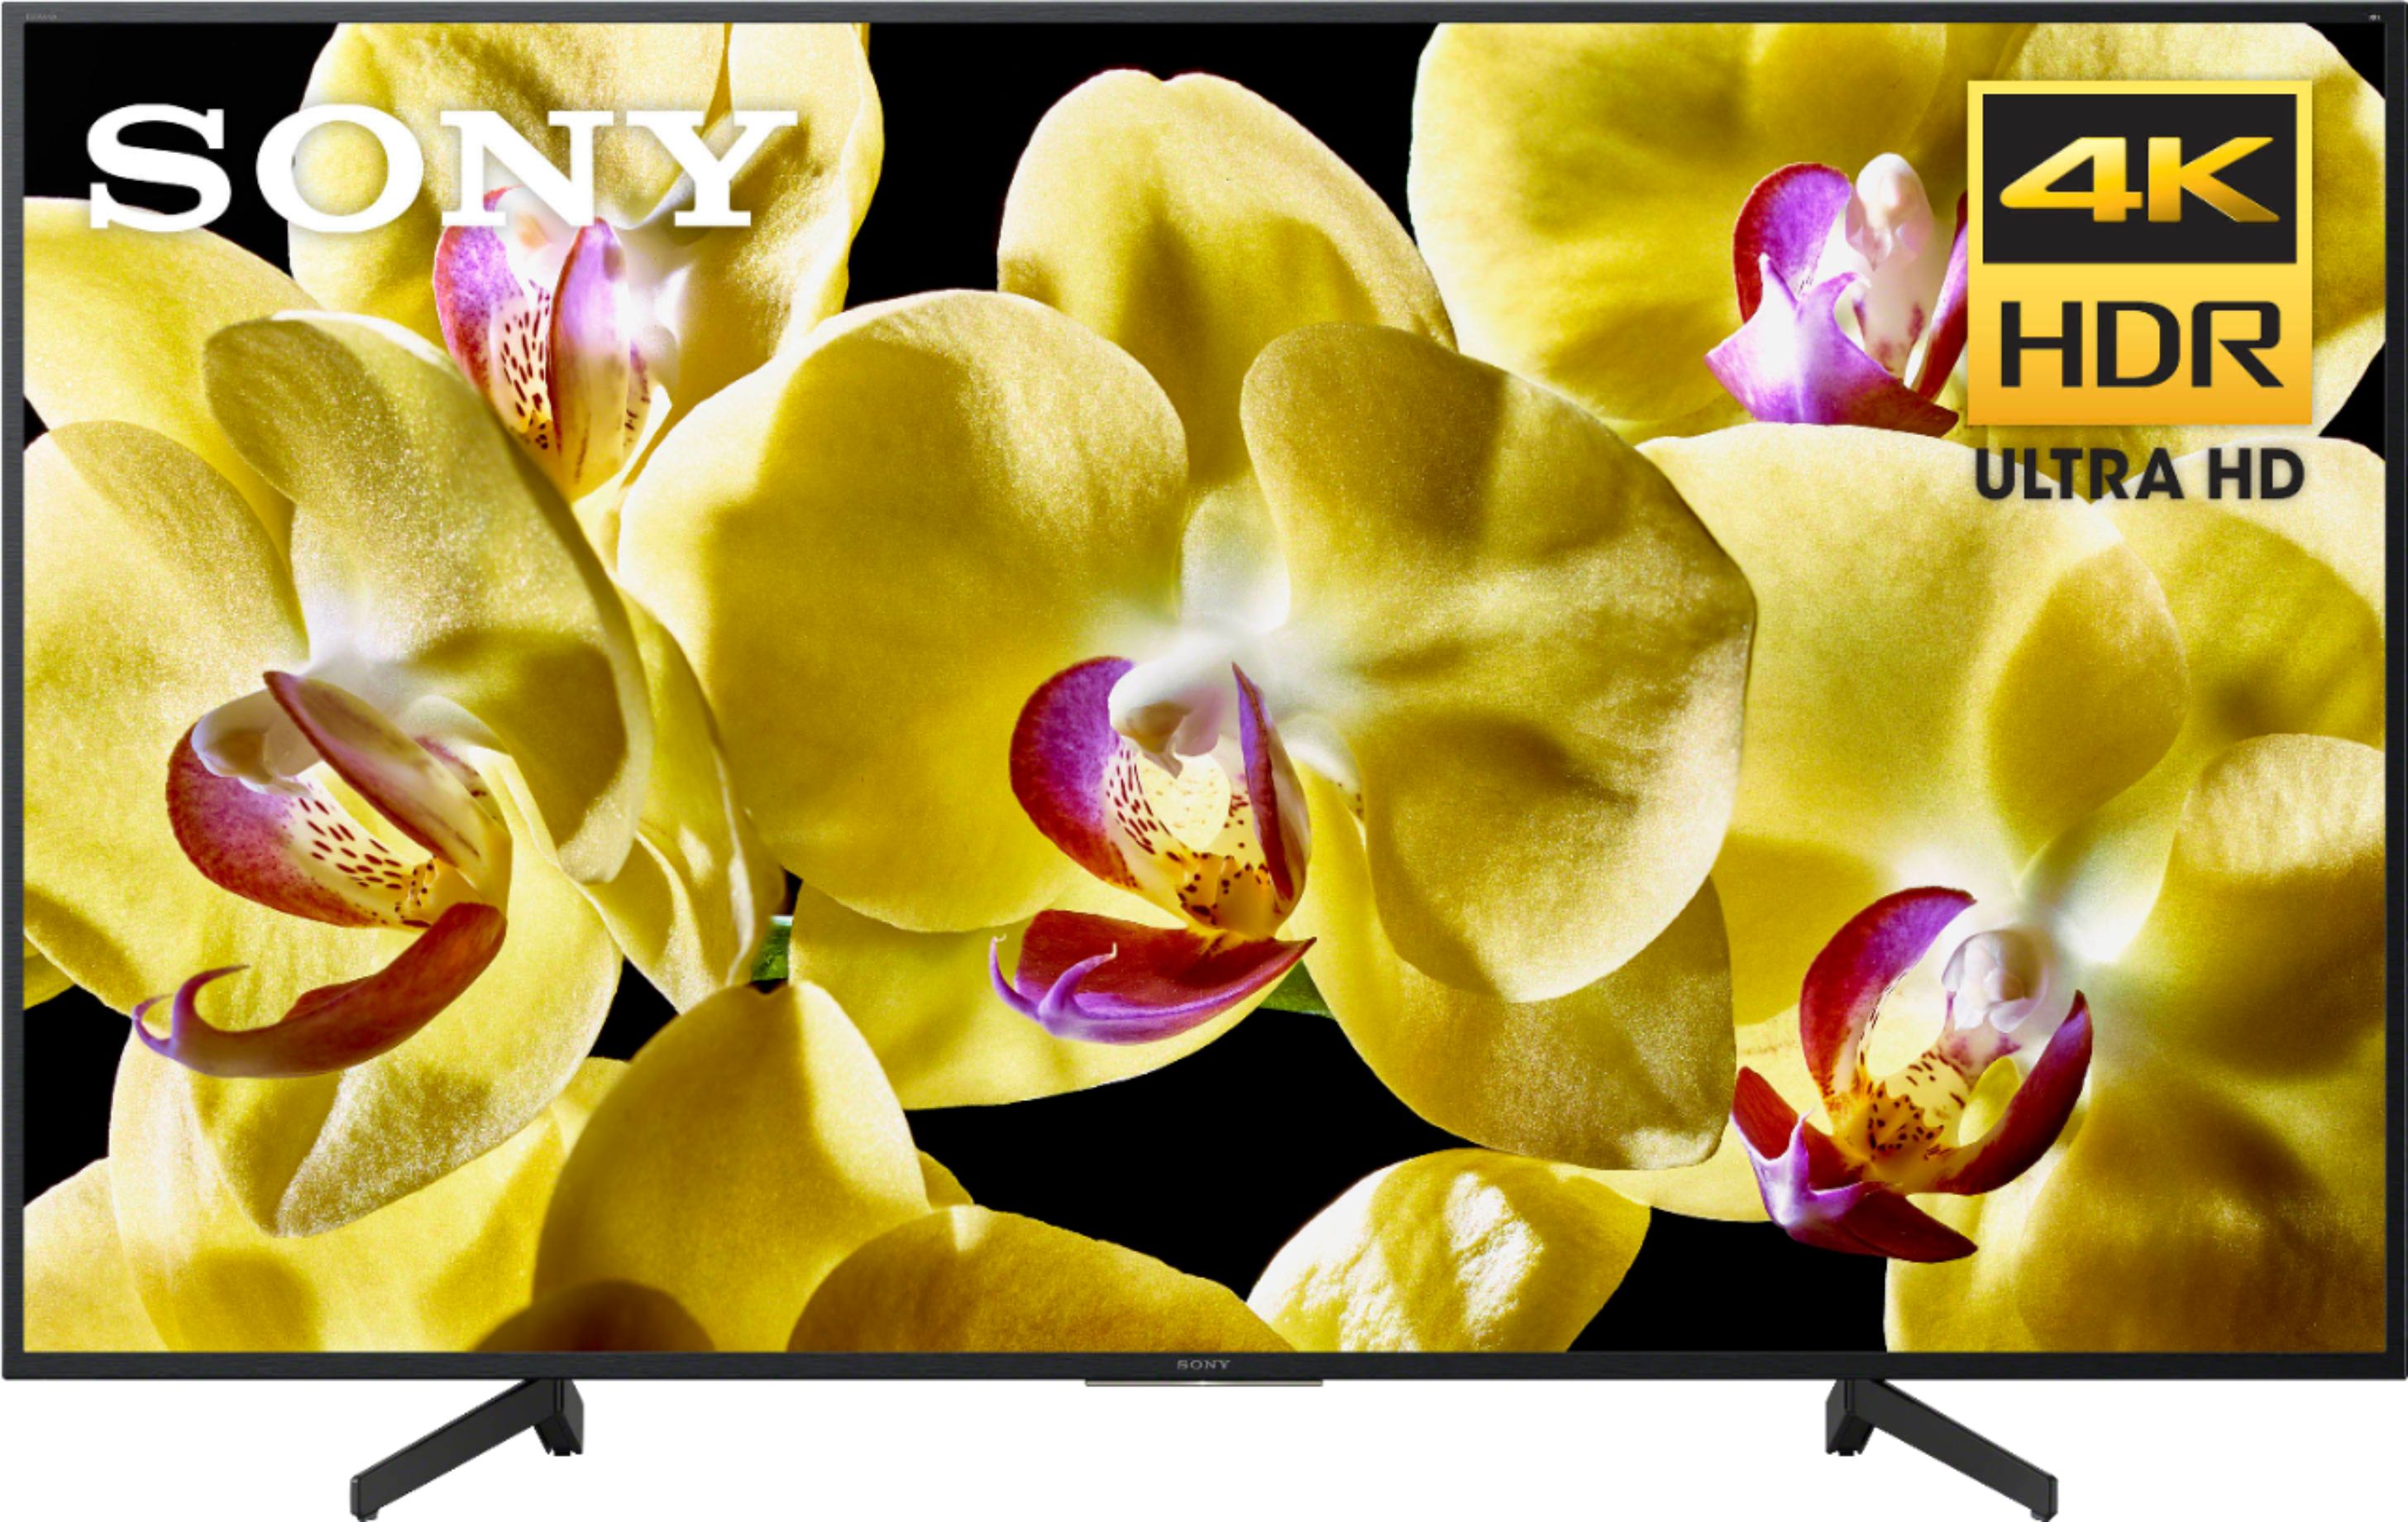 Sony - 43" Class - LED - X800G Series - 2160p - Smart - 4K UHD TV with HDR